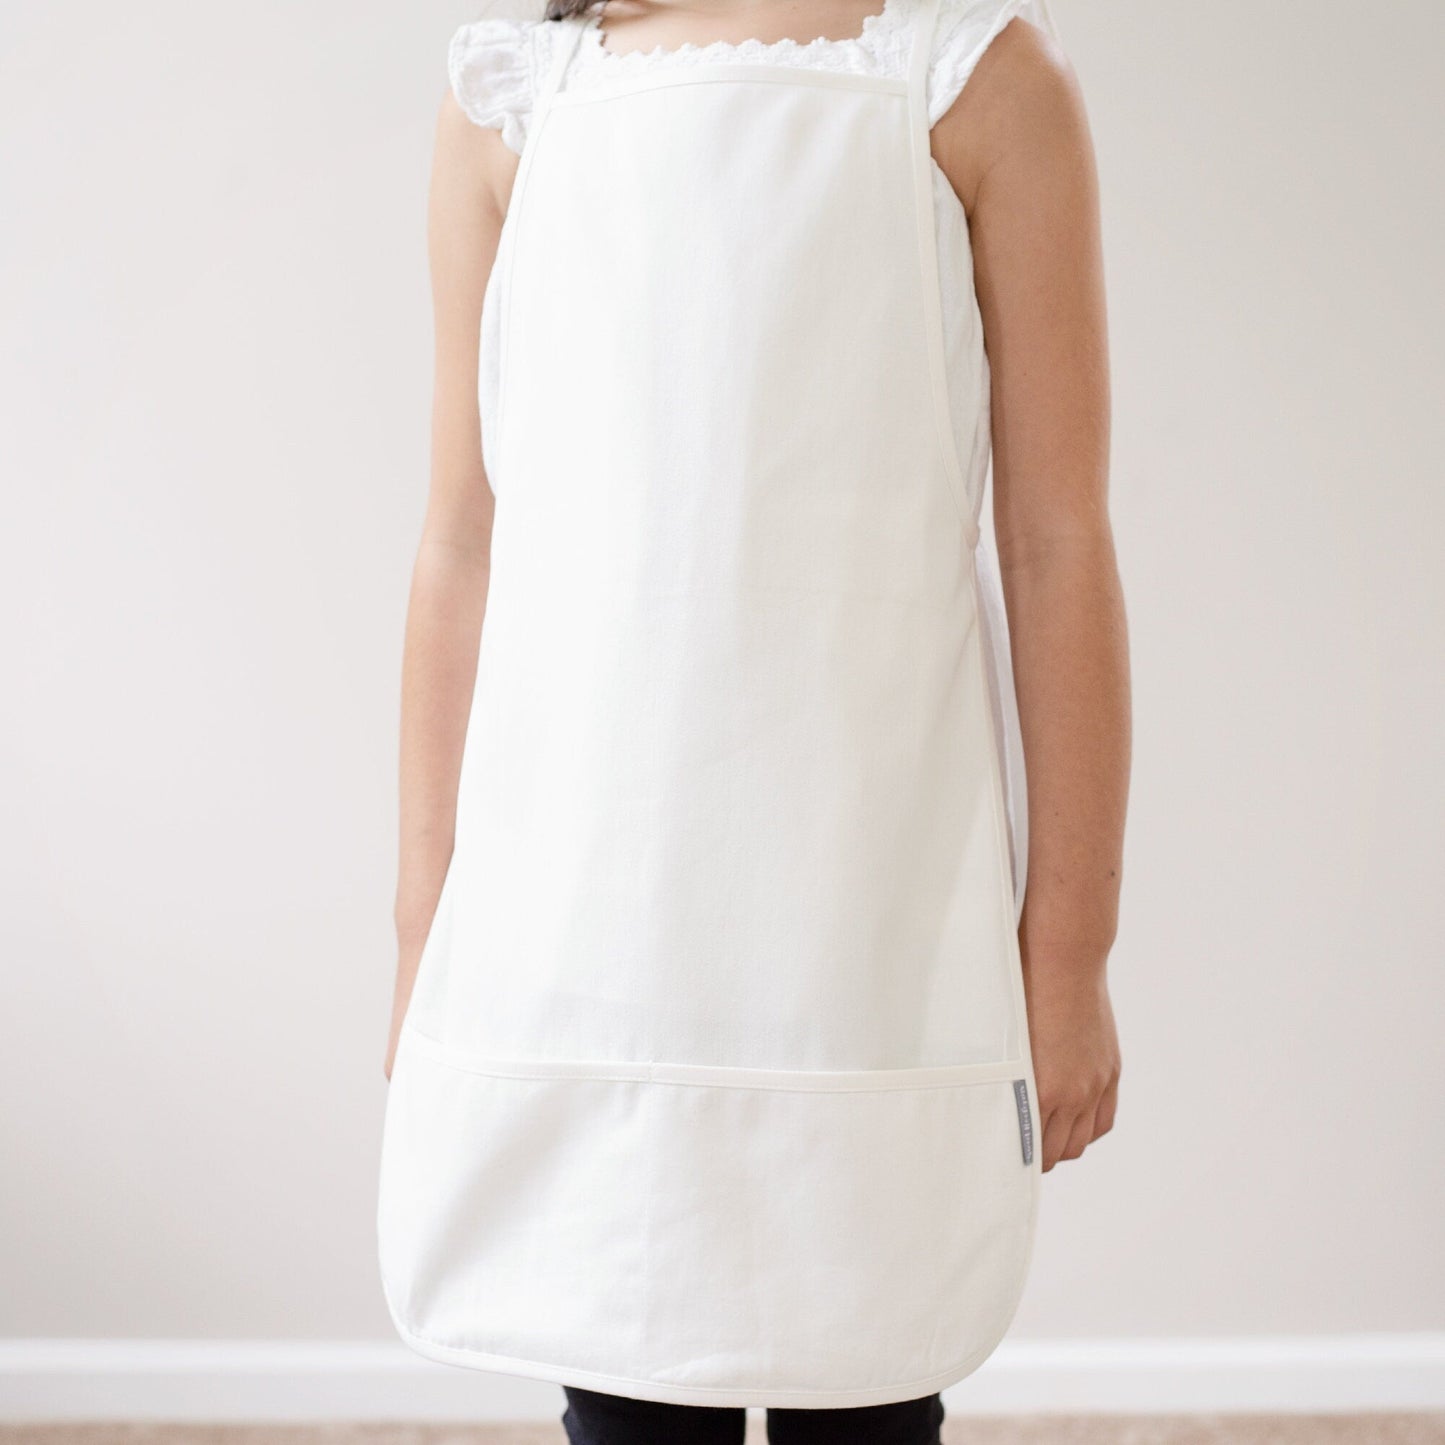 Load image into Gallery viewer, Kids Craft Apron | Youth Kids Craft Apron | Child Apron | Full Kids Kitchen Apron | Kids Baking Apron | Cotton Canvas Full Apron | Aprons
